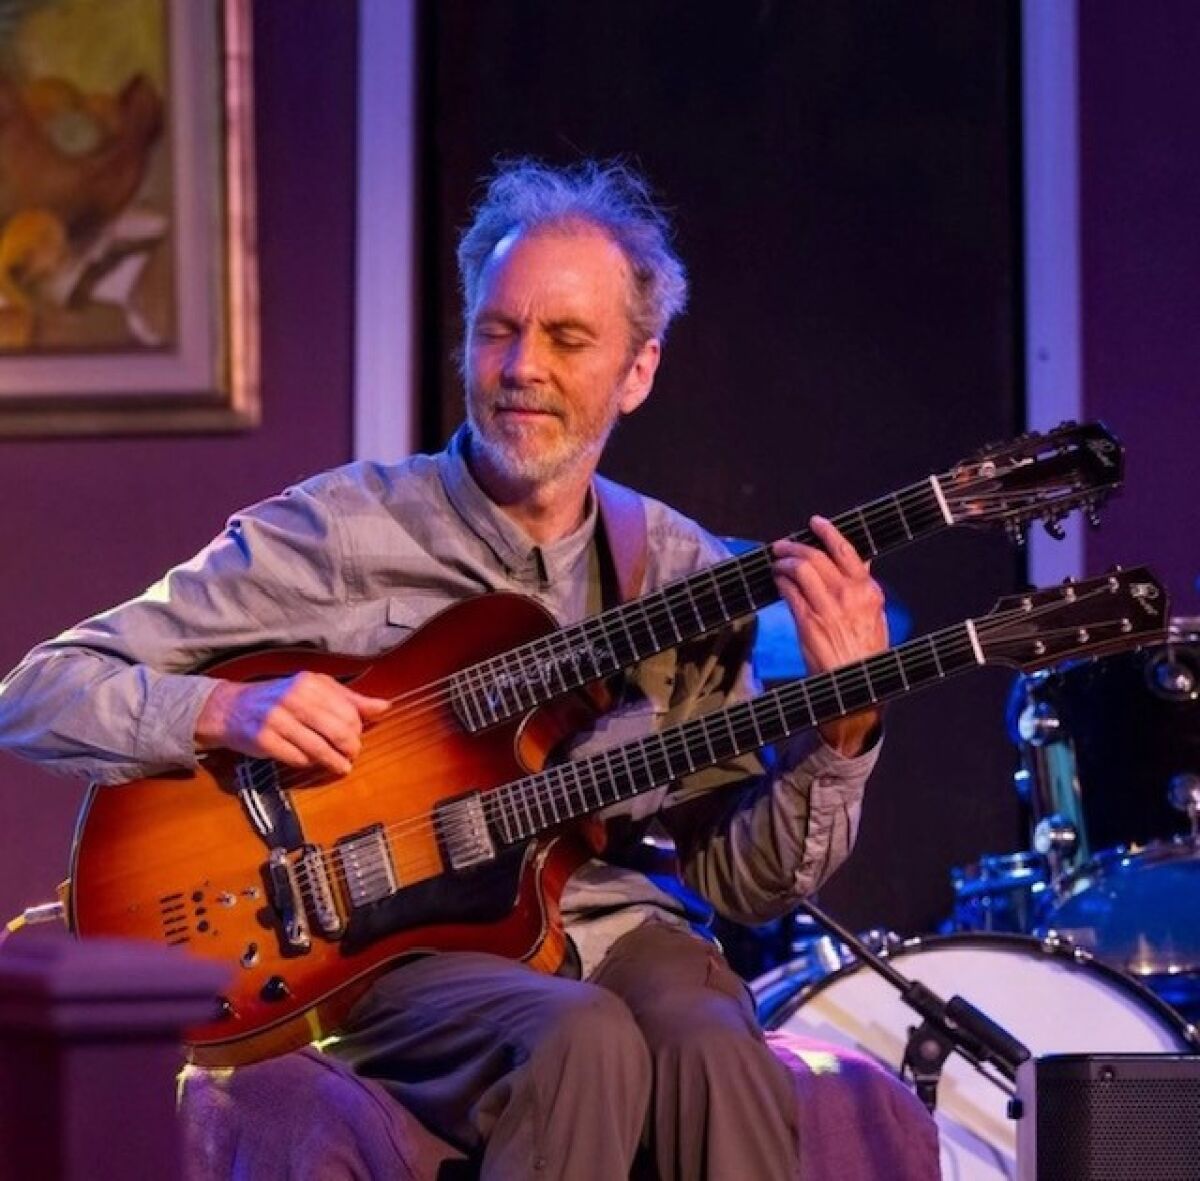 Peter Sprague will perform as part of the La Jolla Community Center's Fourth Friday Jazz Series on April 28 in La Jolla.